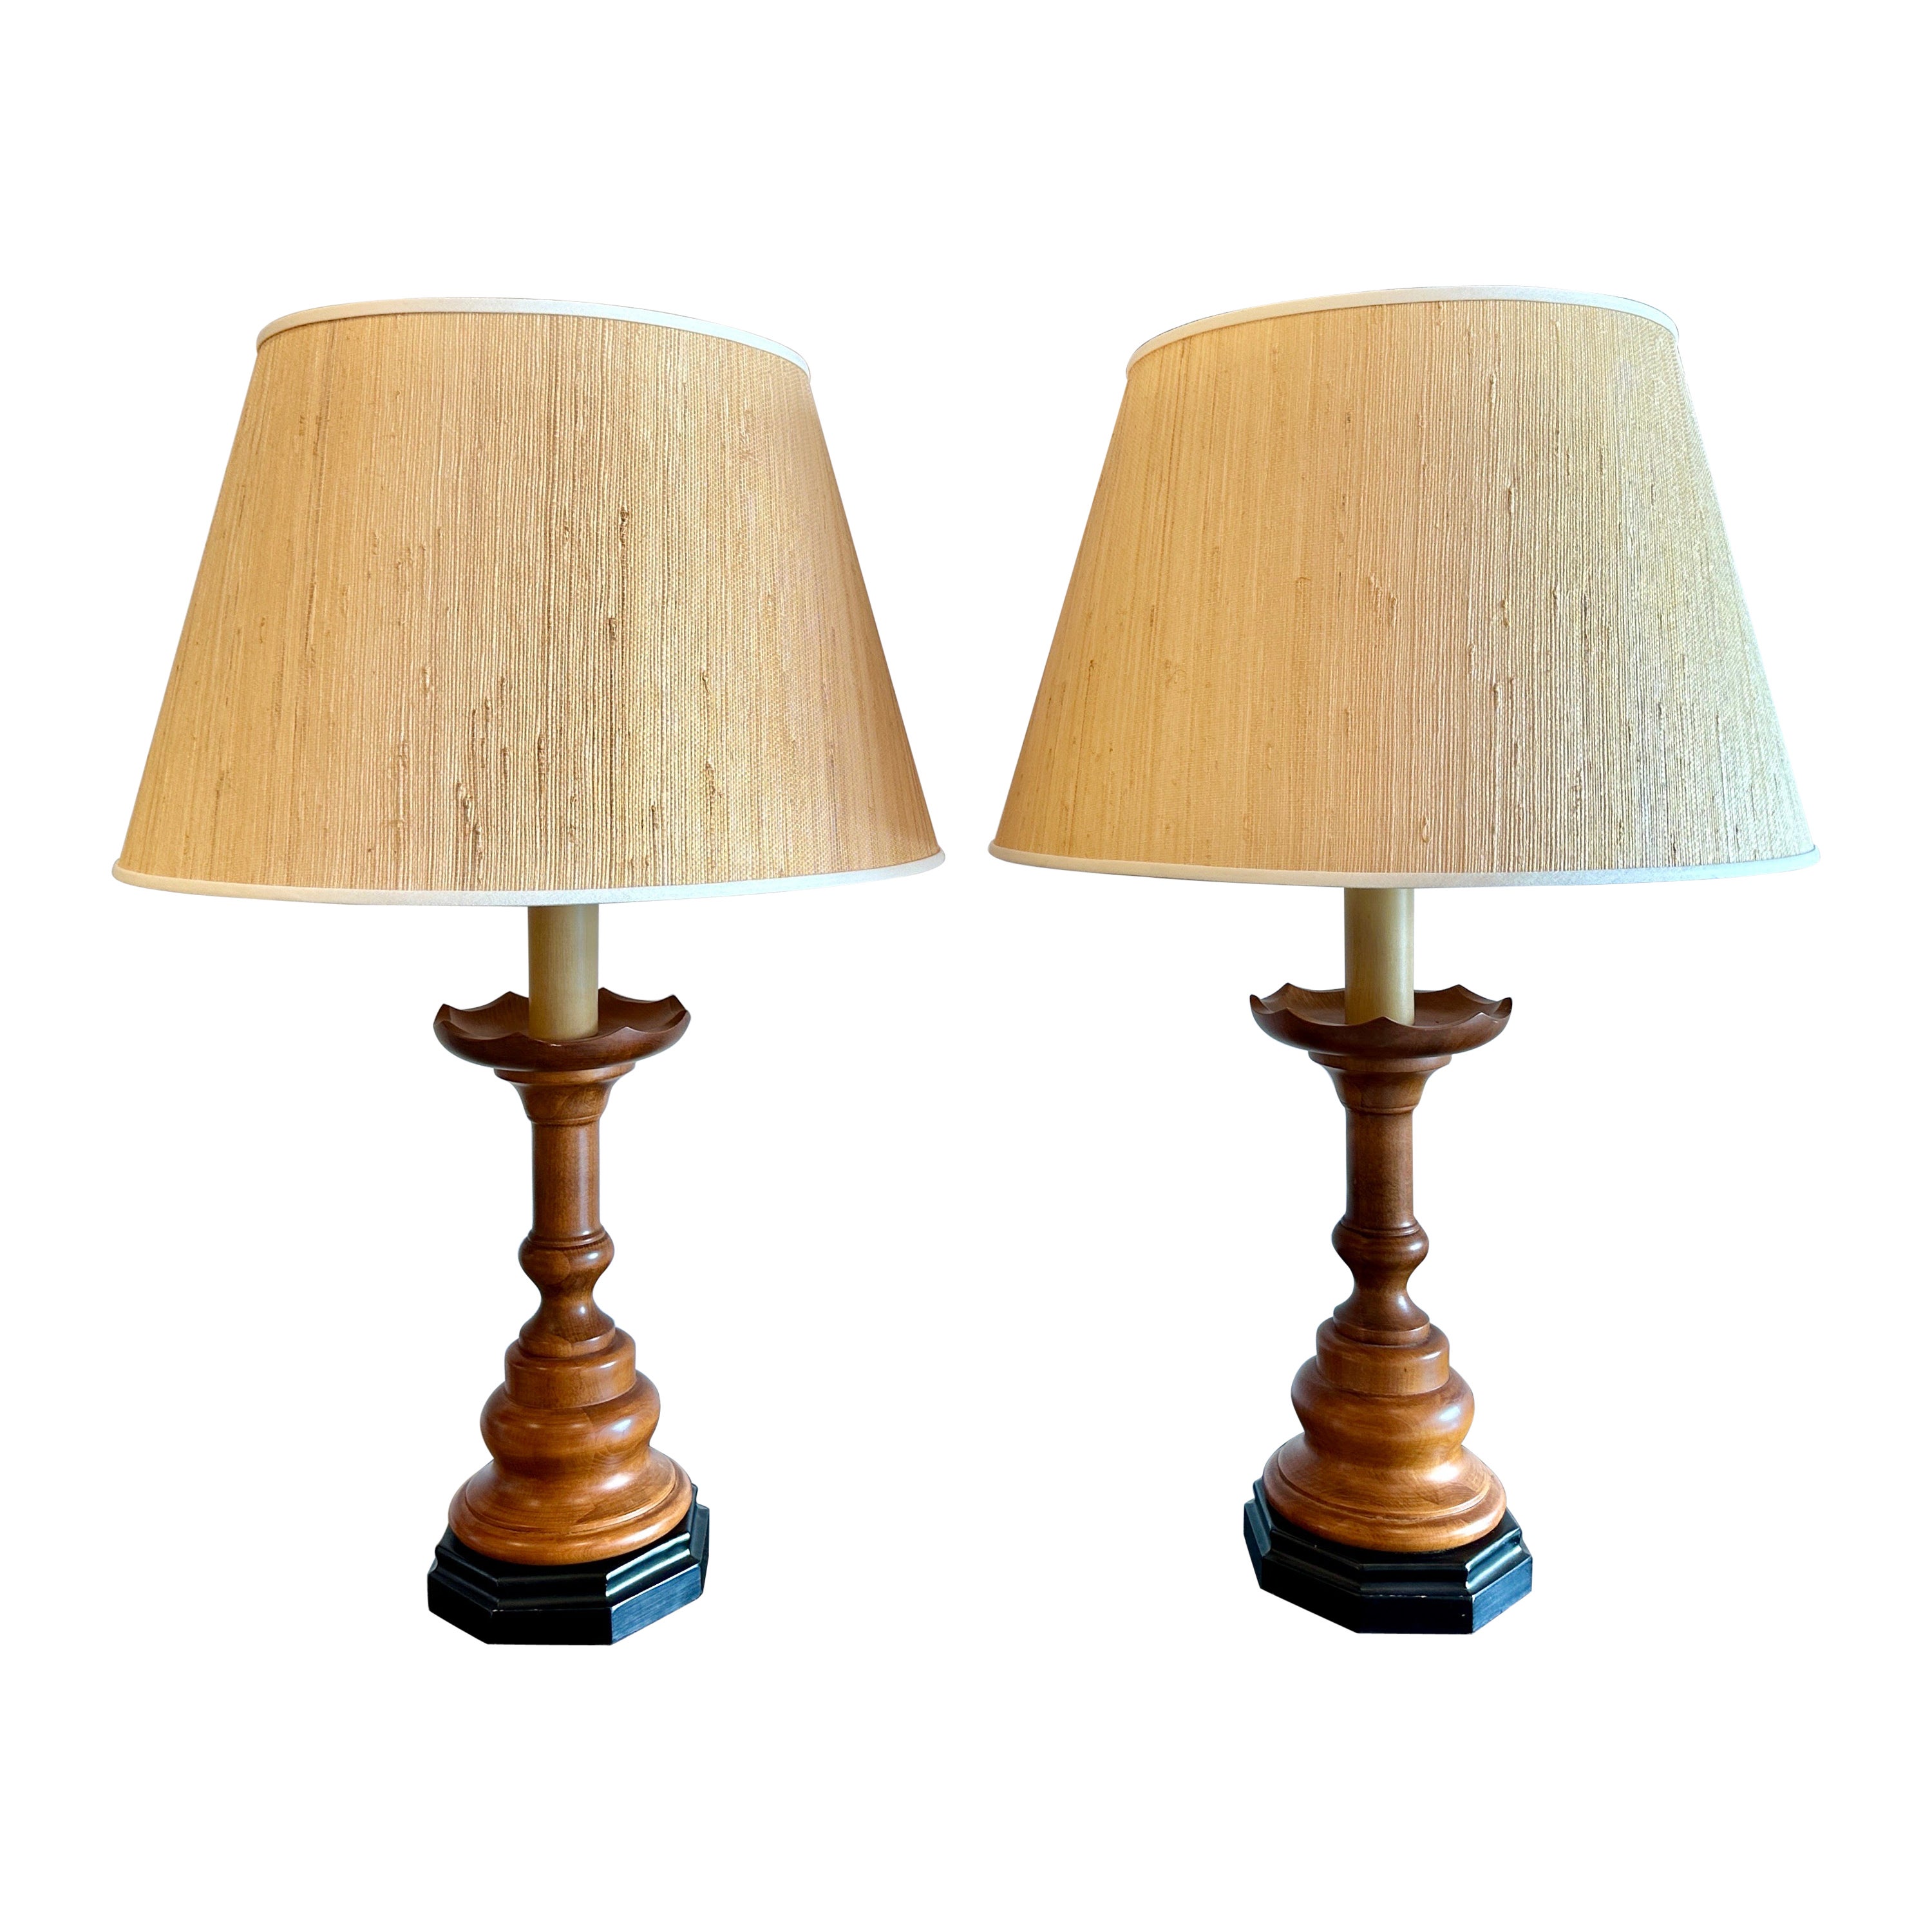 Turned Wood Lamps with Chess Pawn Design, Pair For Sale